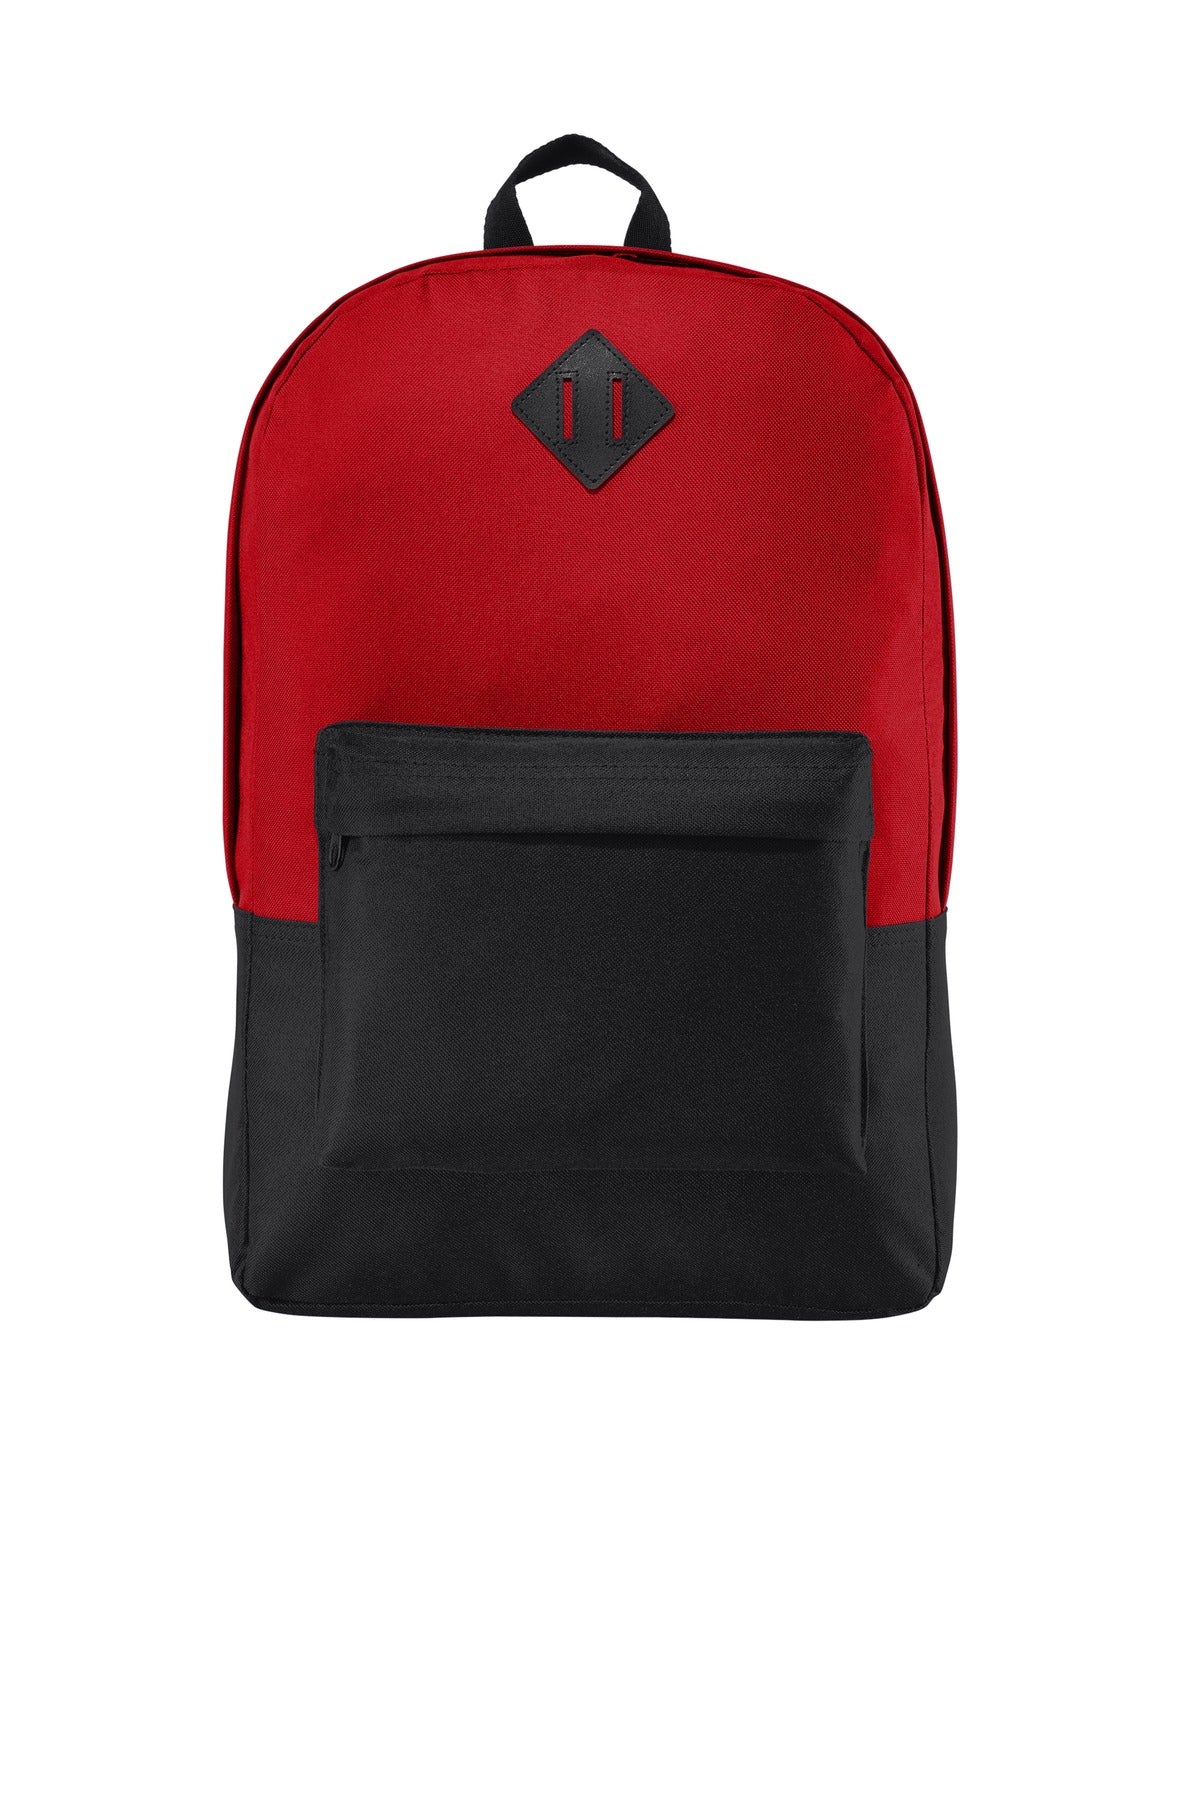 Photo of Port Authority Bags BG7150  color  True Red/ Black